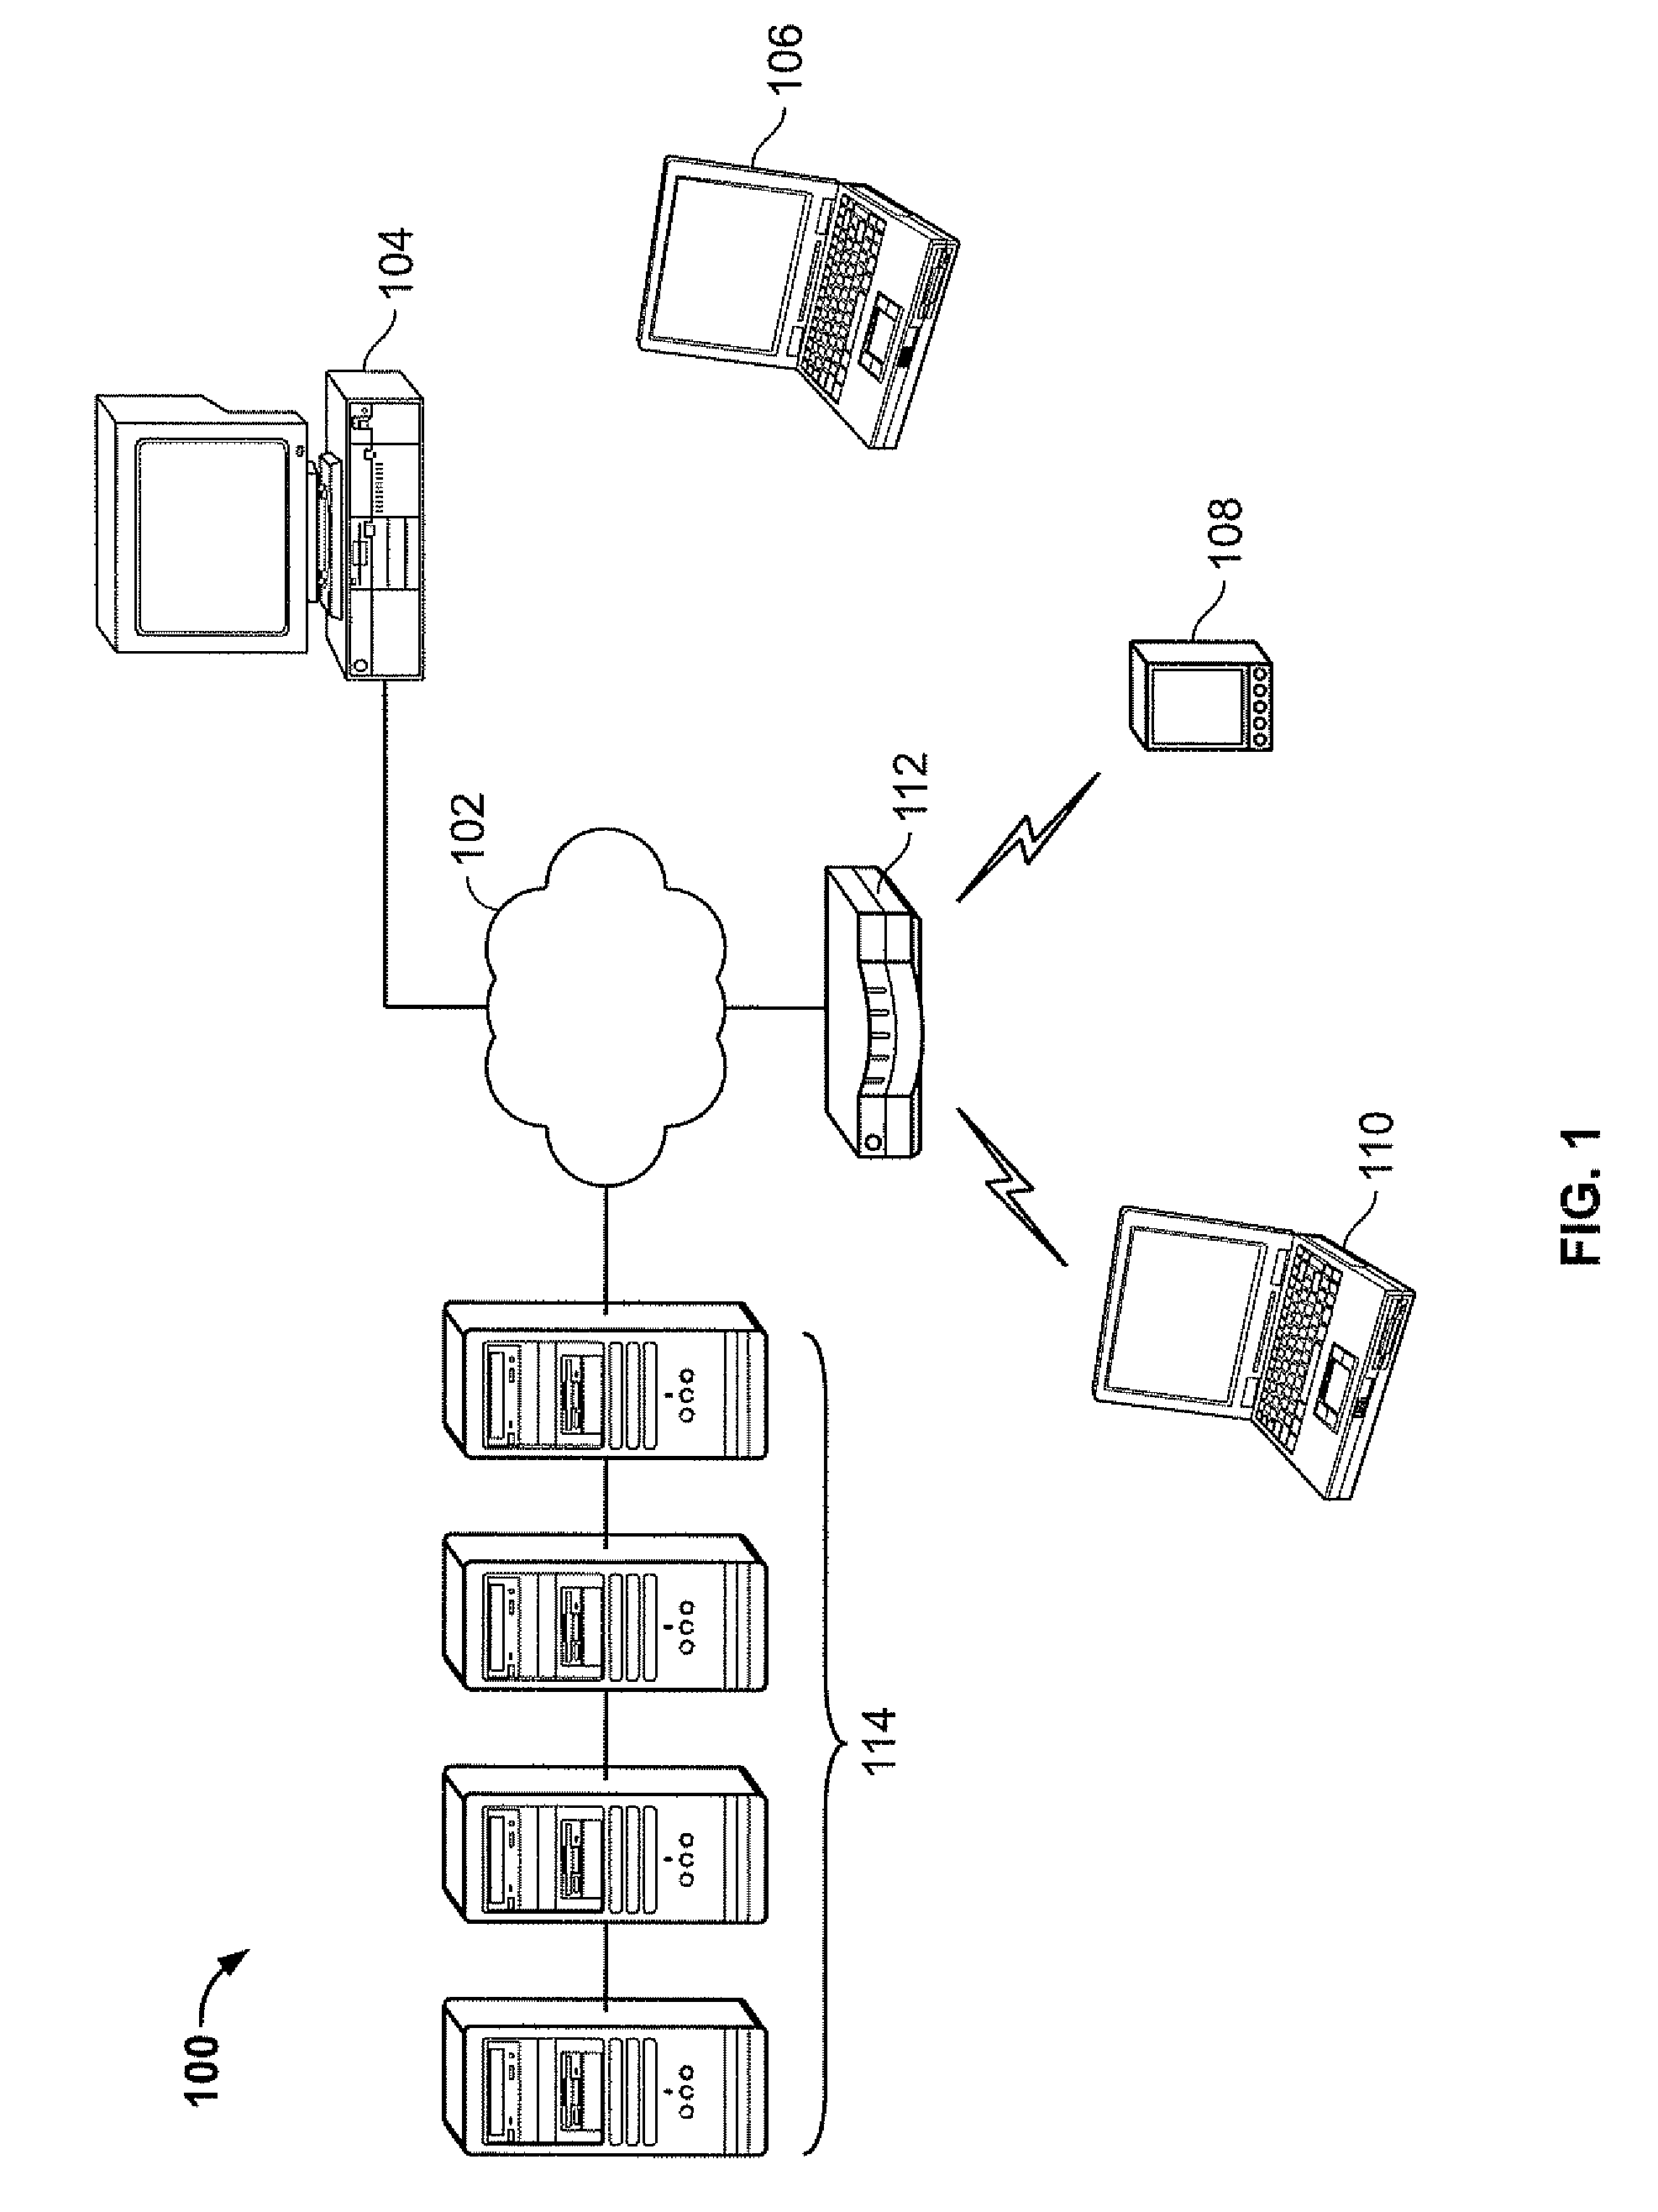 Computer Simulation Method With User-Defined Transportation And Layout